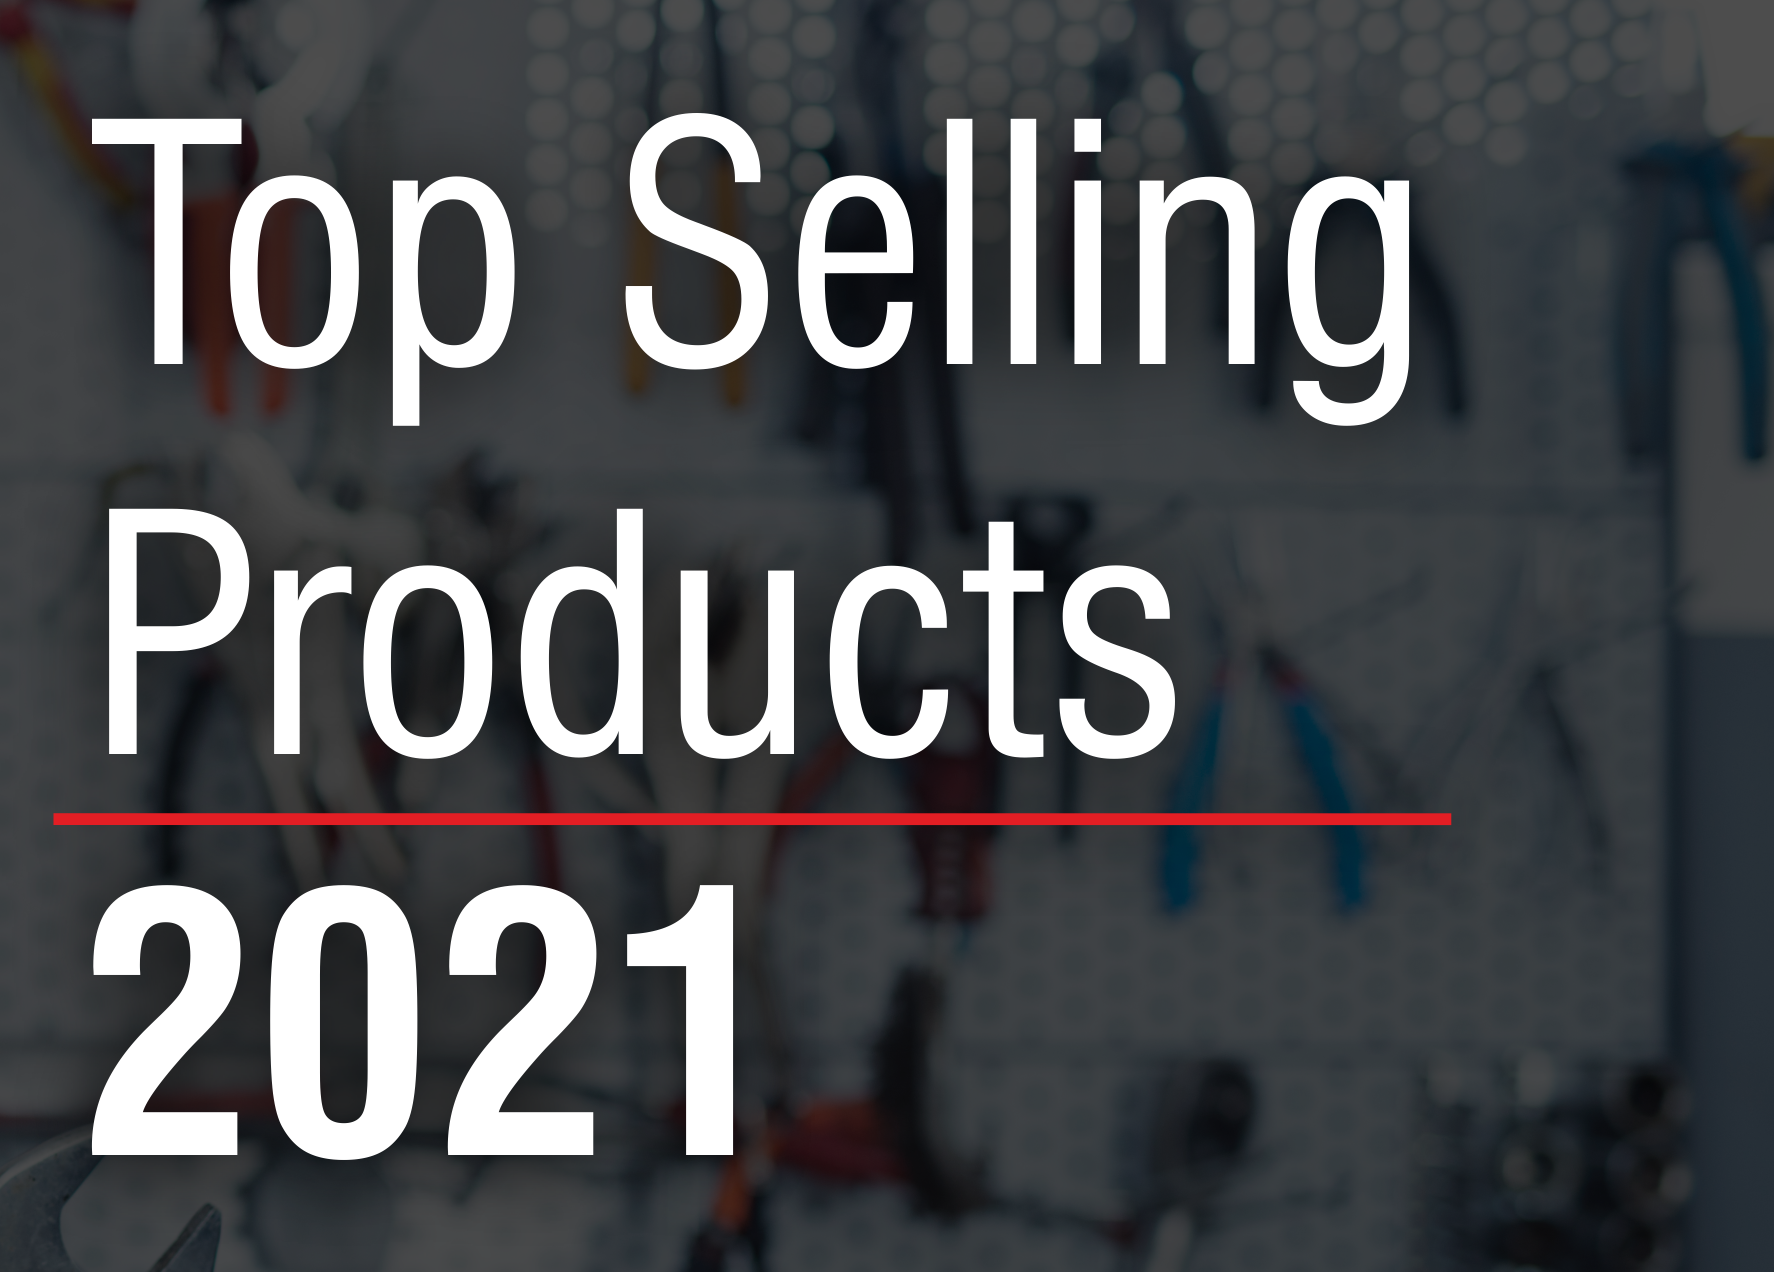 Top Selling Products 2021